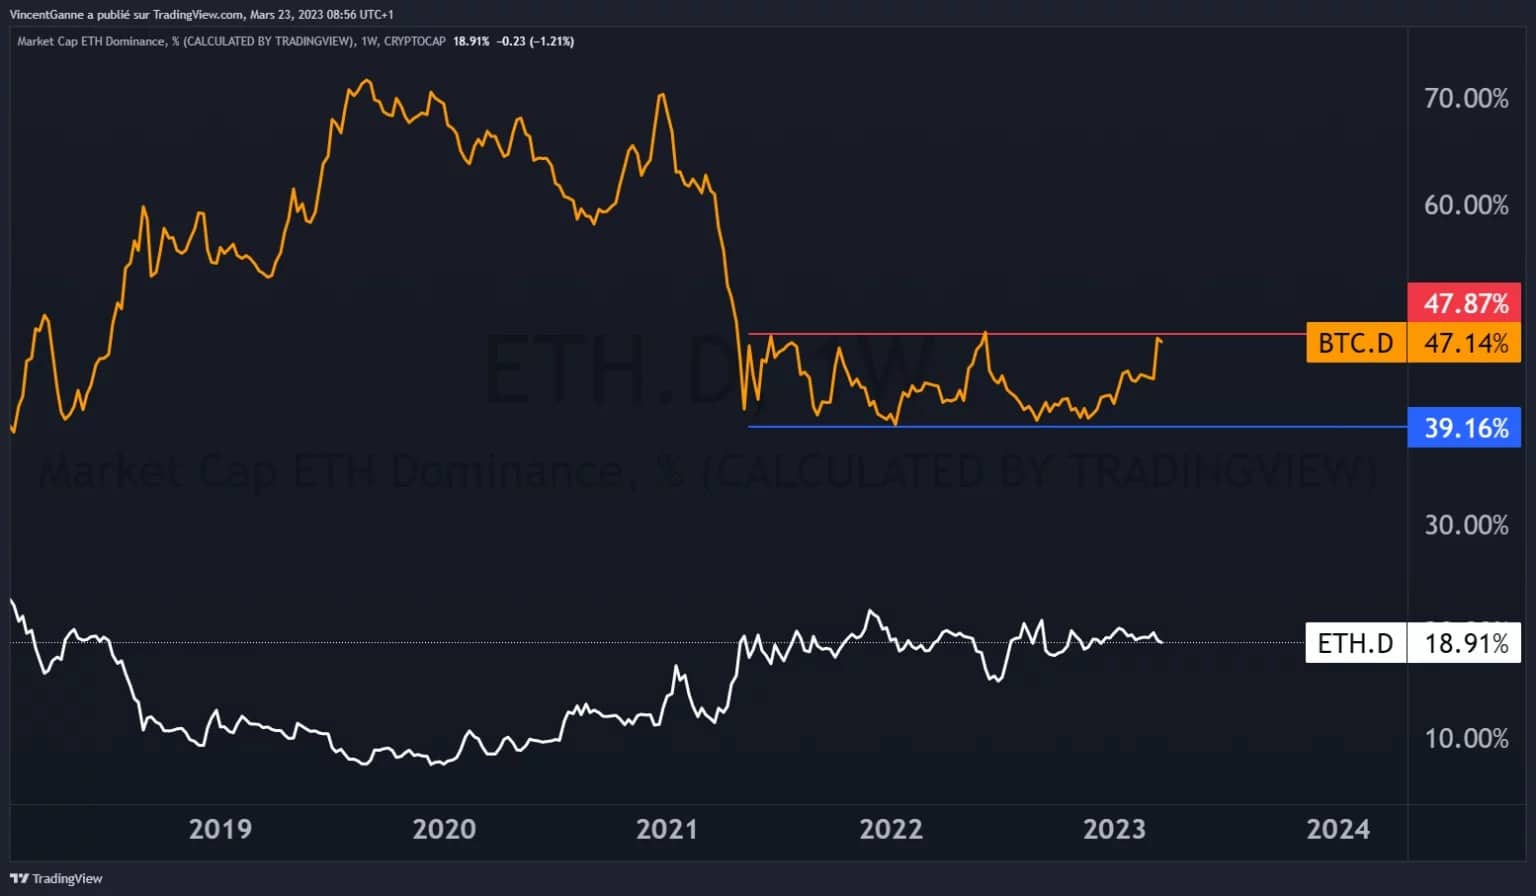 Chart showing the comparison of Bitcoin dominance with Ethereum dominance